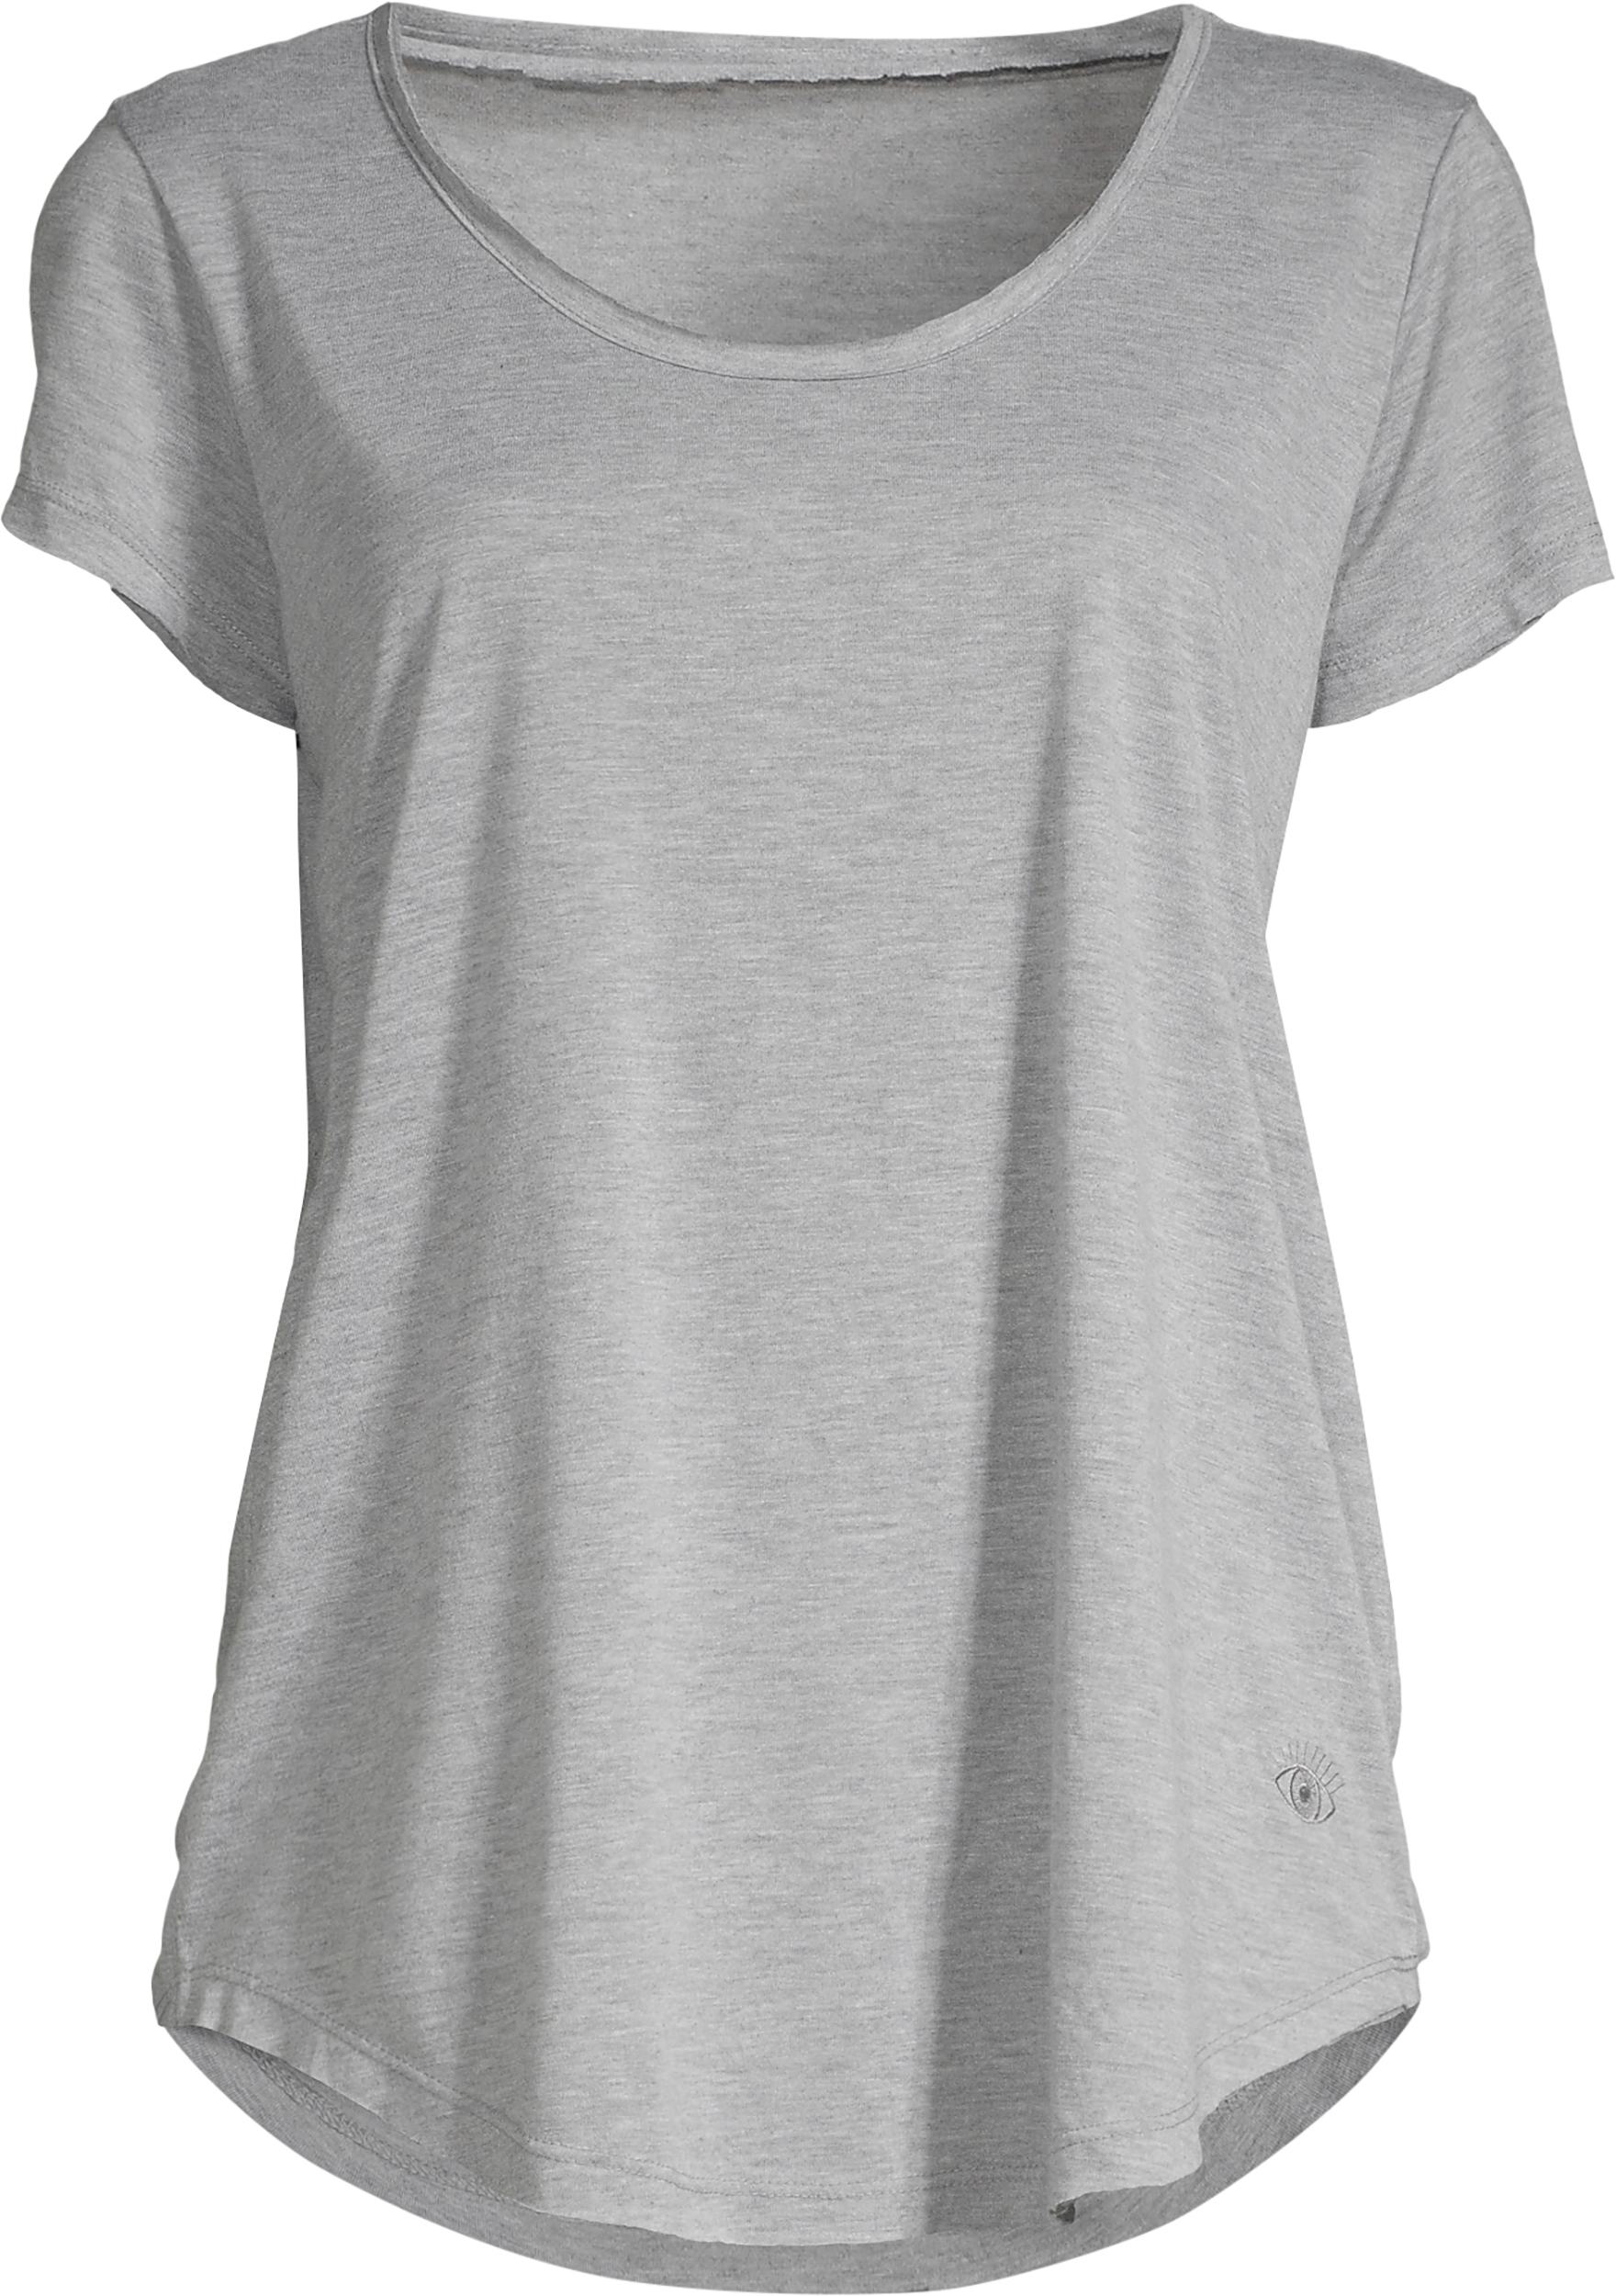 Sofia Jeans Scoop Neck Embroidered Tee Women's - image 3 of 7